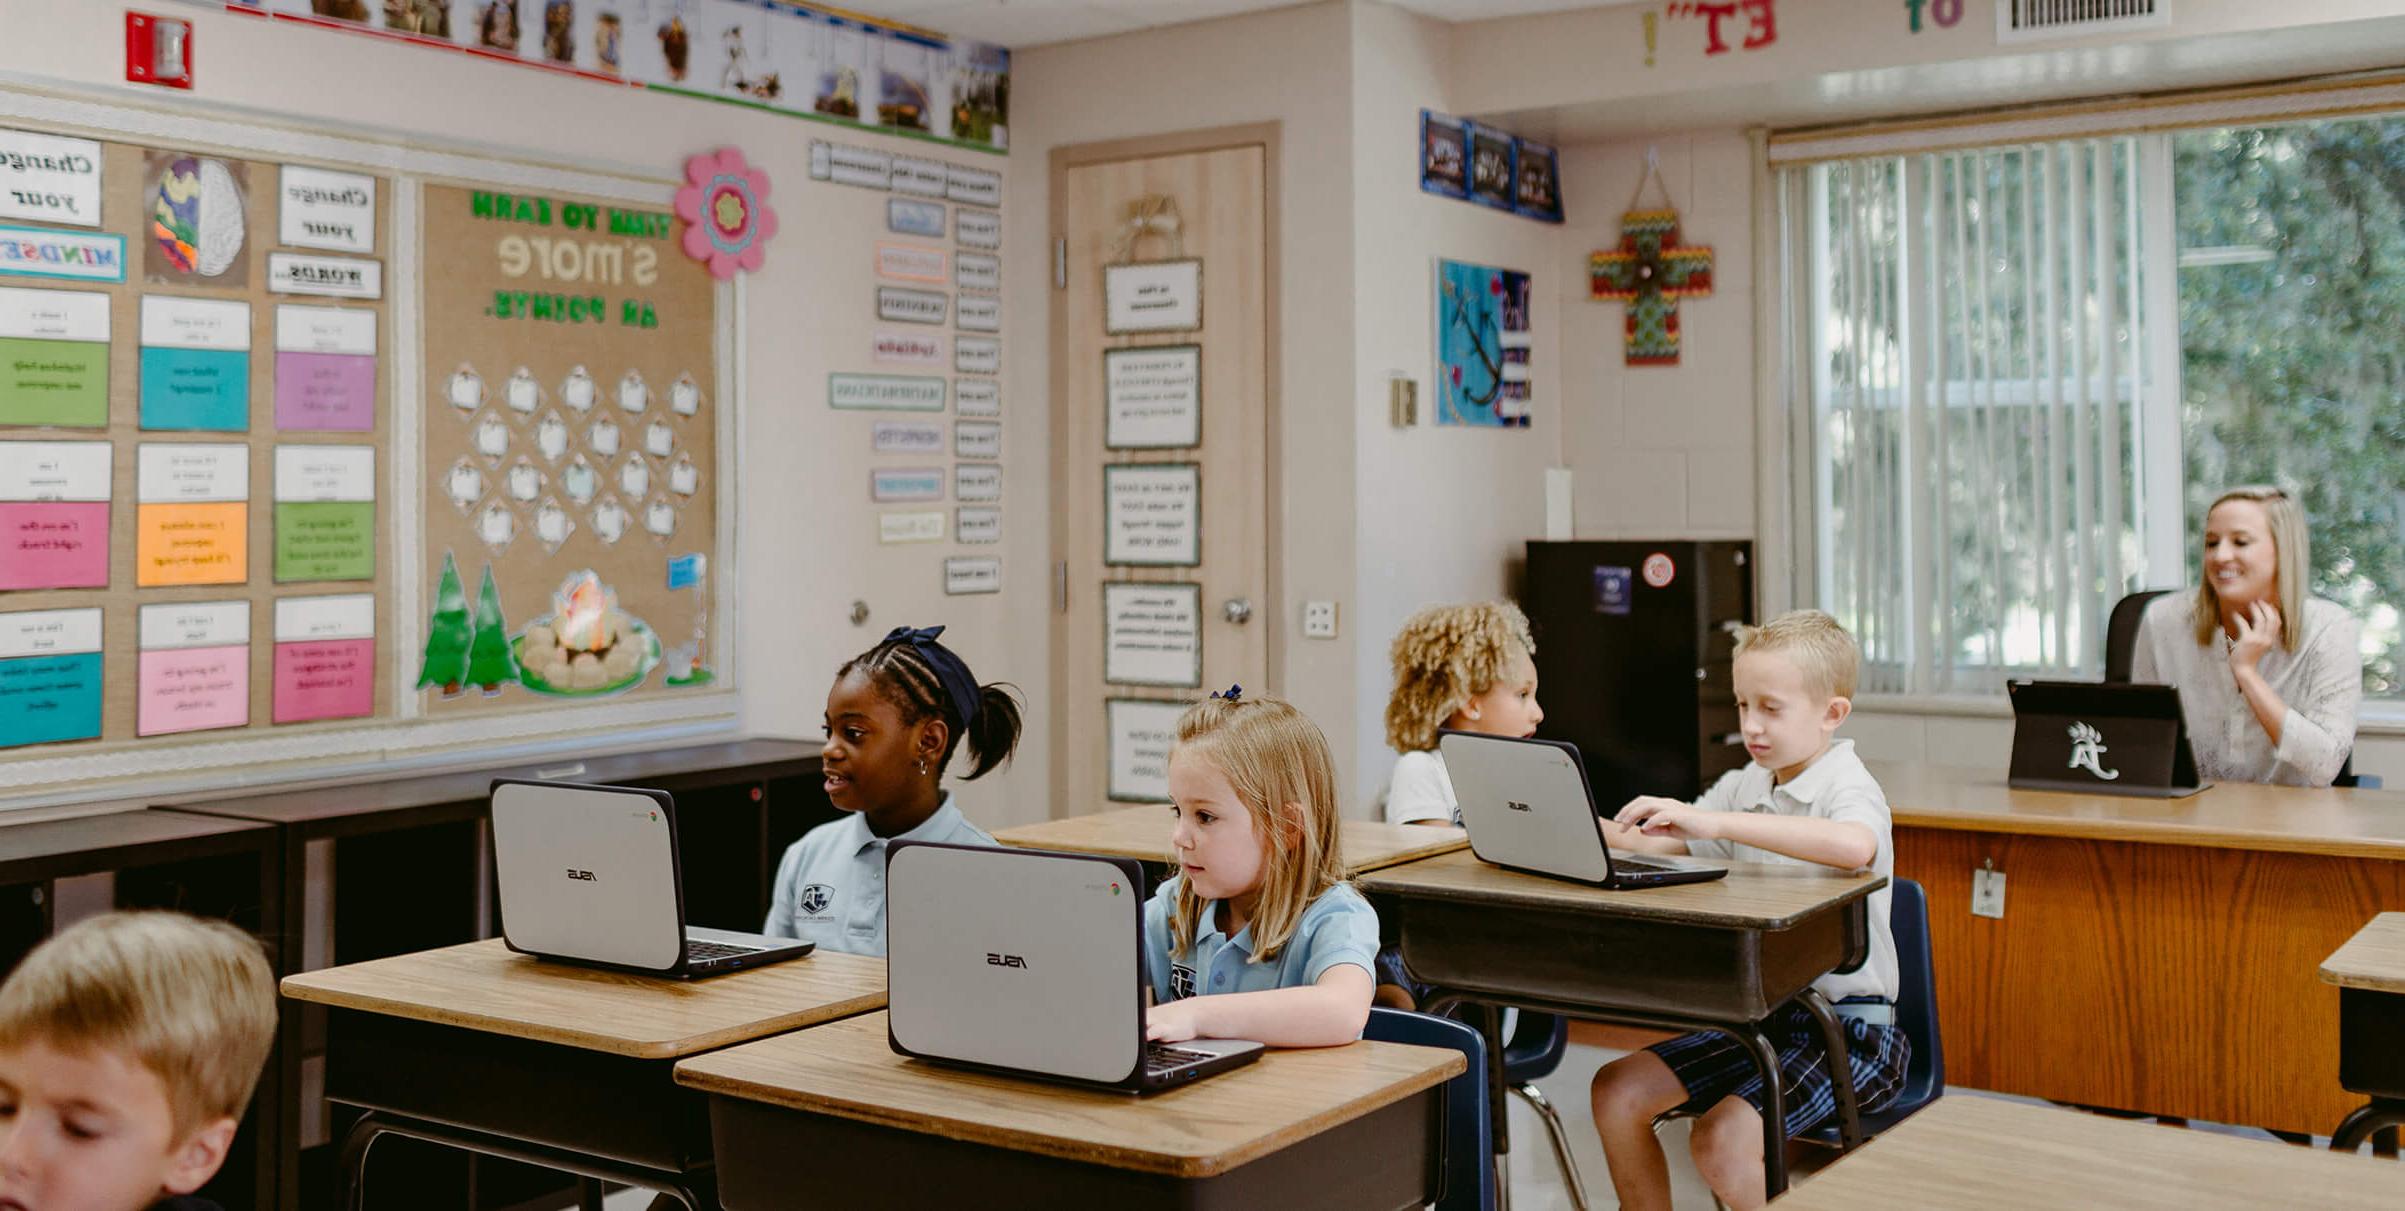 Kids in classroom using computers